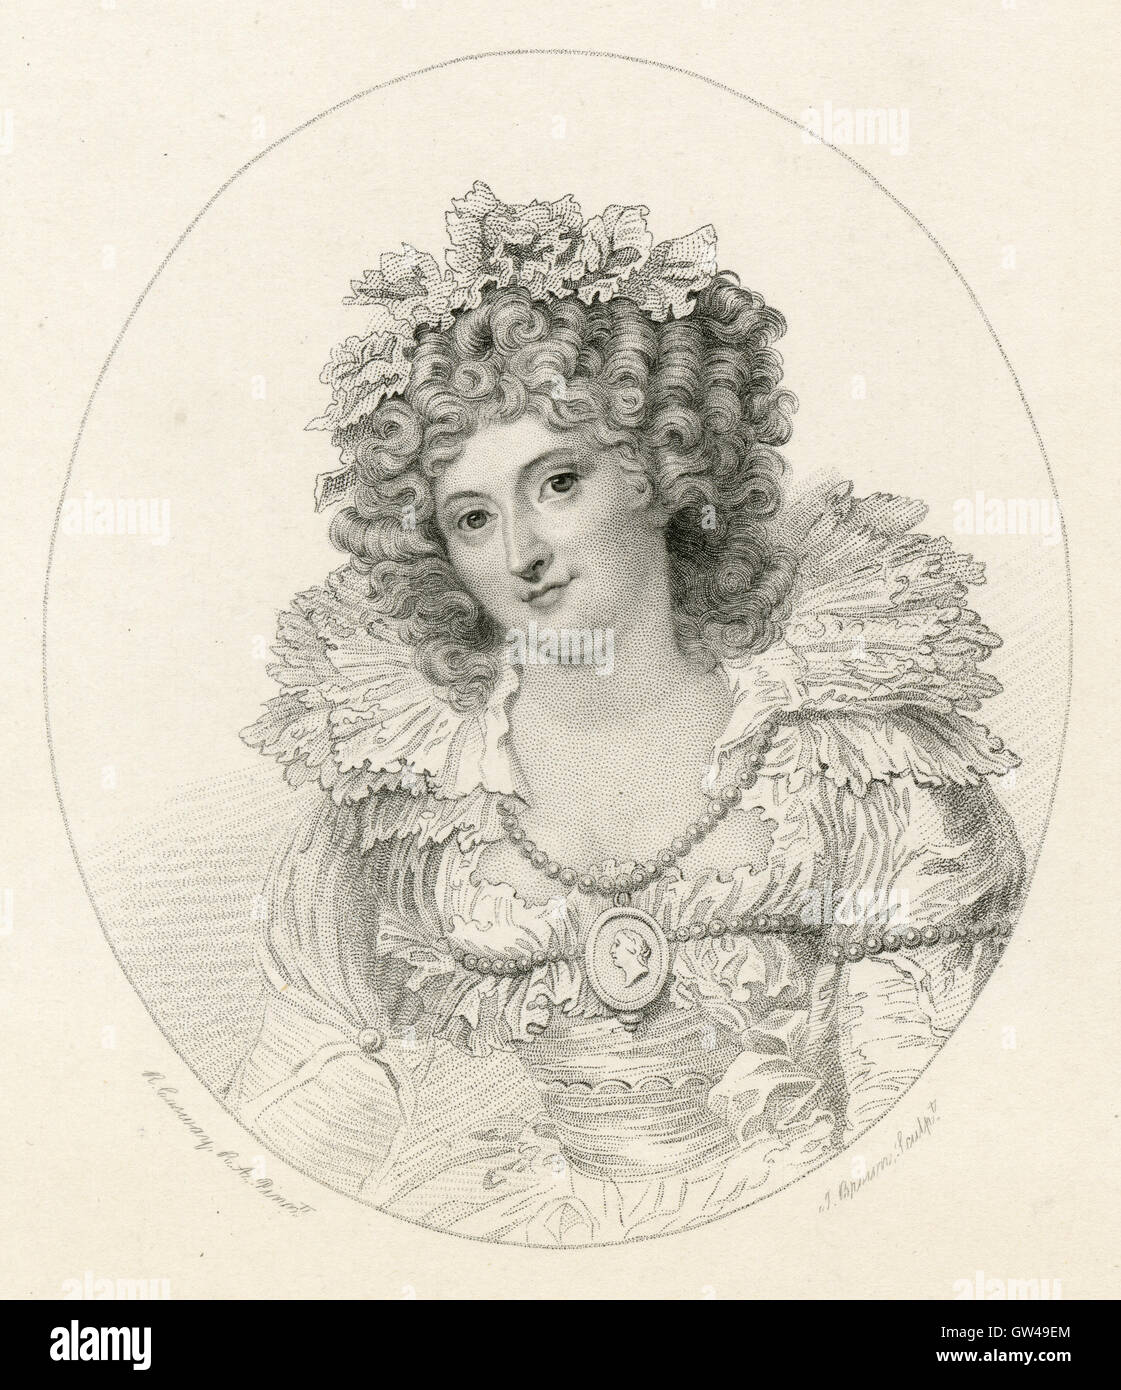 Antique 1893 engraving, Mrs. Fitzherbert. Maria Anne Fitzherbert (1756-1837) was a longtime companion of the future King George IV of the United Kingdom with whom she secretly contracted a marriage that was invalid under English civil law before his accession to the throne. SOURCE: ORIGINAL STEEL ENGRAVING. Stock Photo